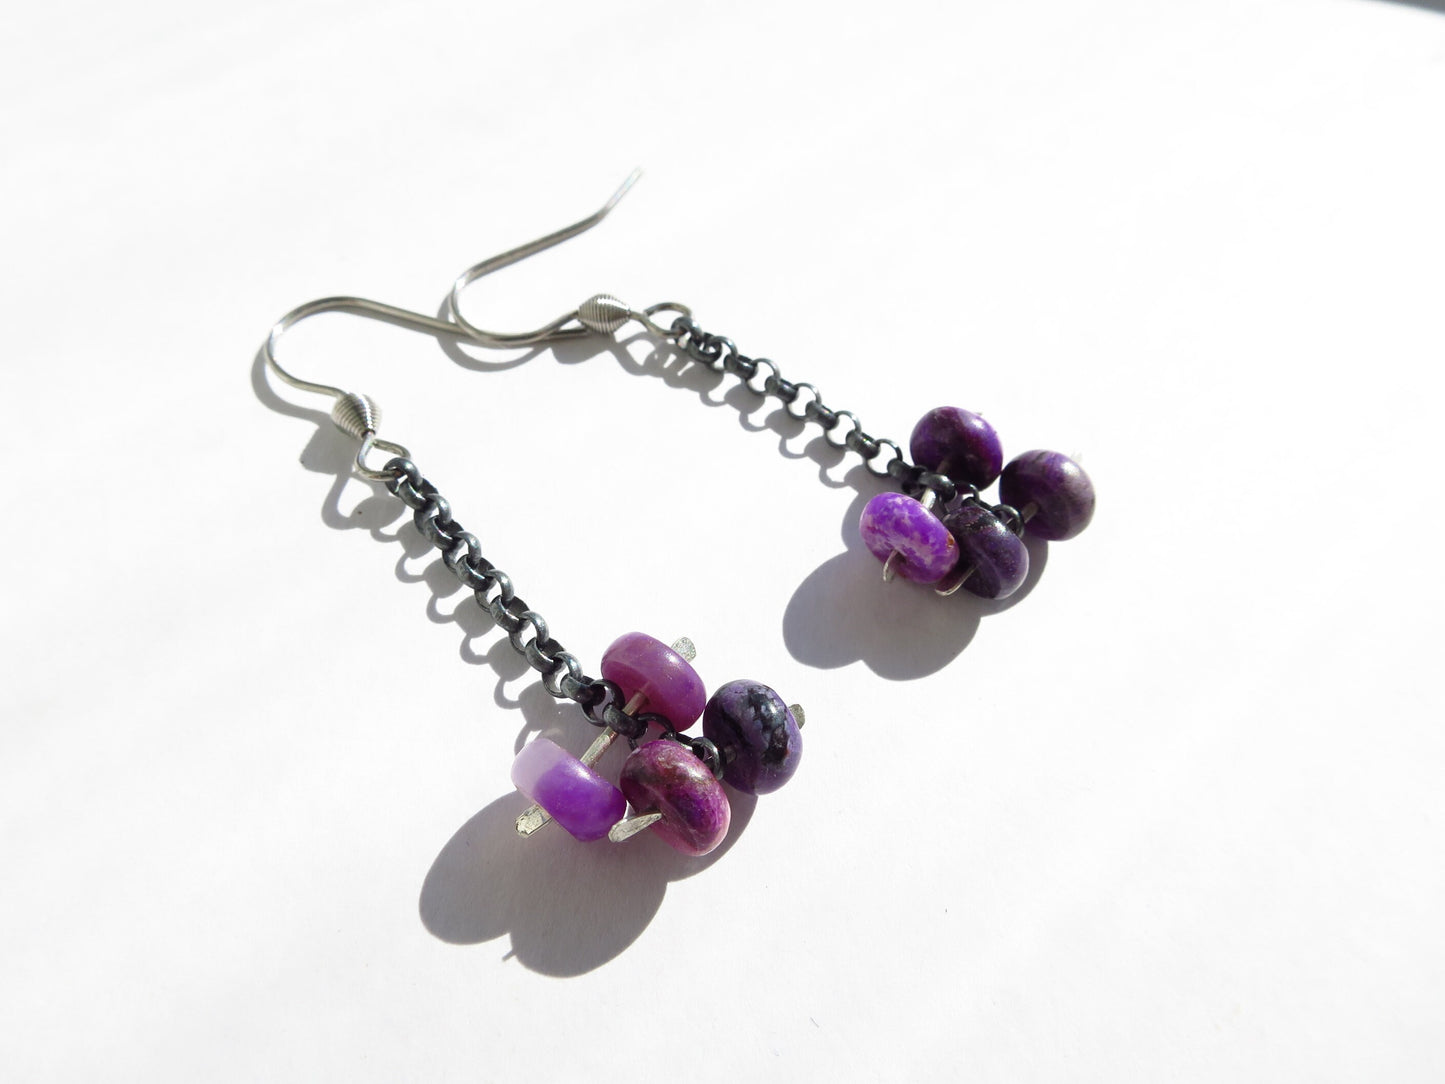 Sugilite earrings 925 sterling silver blackened stainless steel ear hooks unique piece with sterling silver chain genuine sugilite Africa